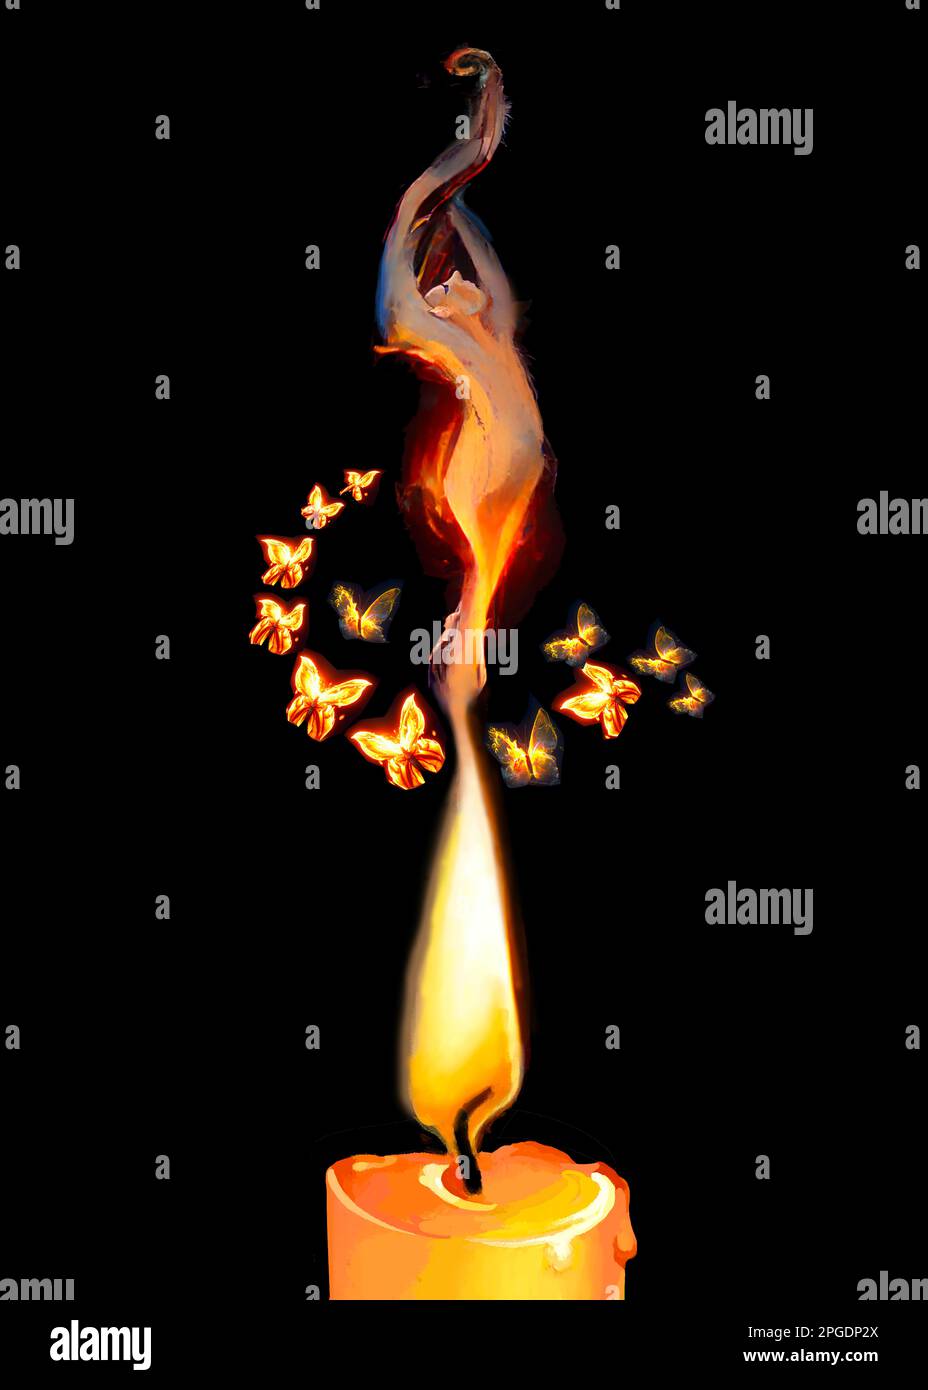 from the flame of a candle a dancing figure is formed surrounded by luminous butterflies Stock Photo